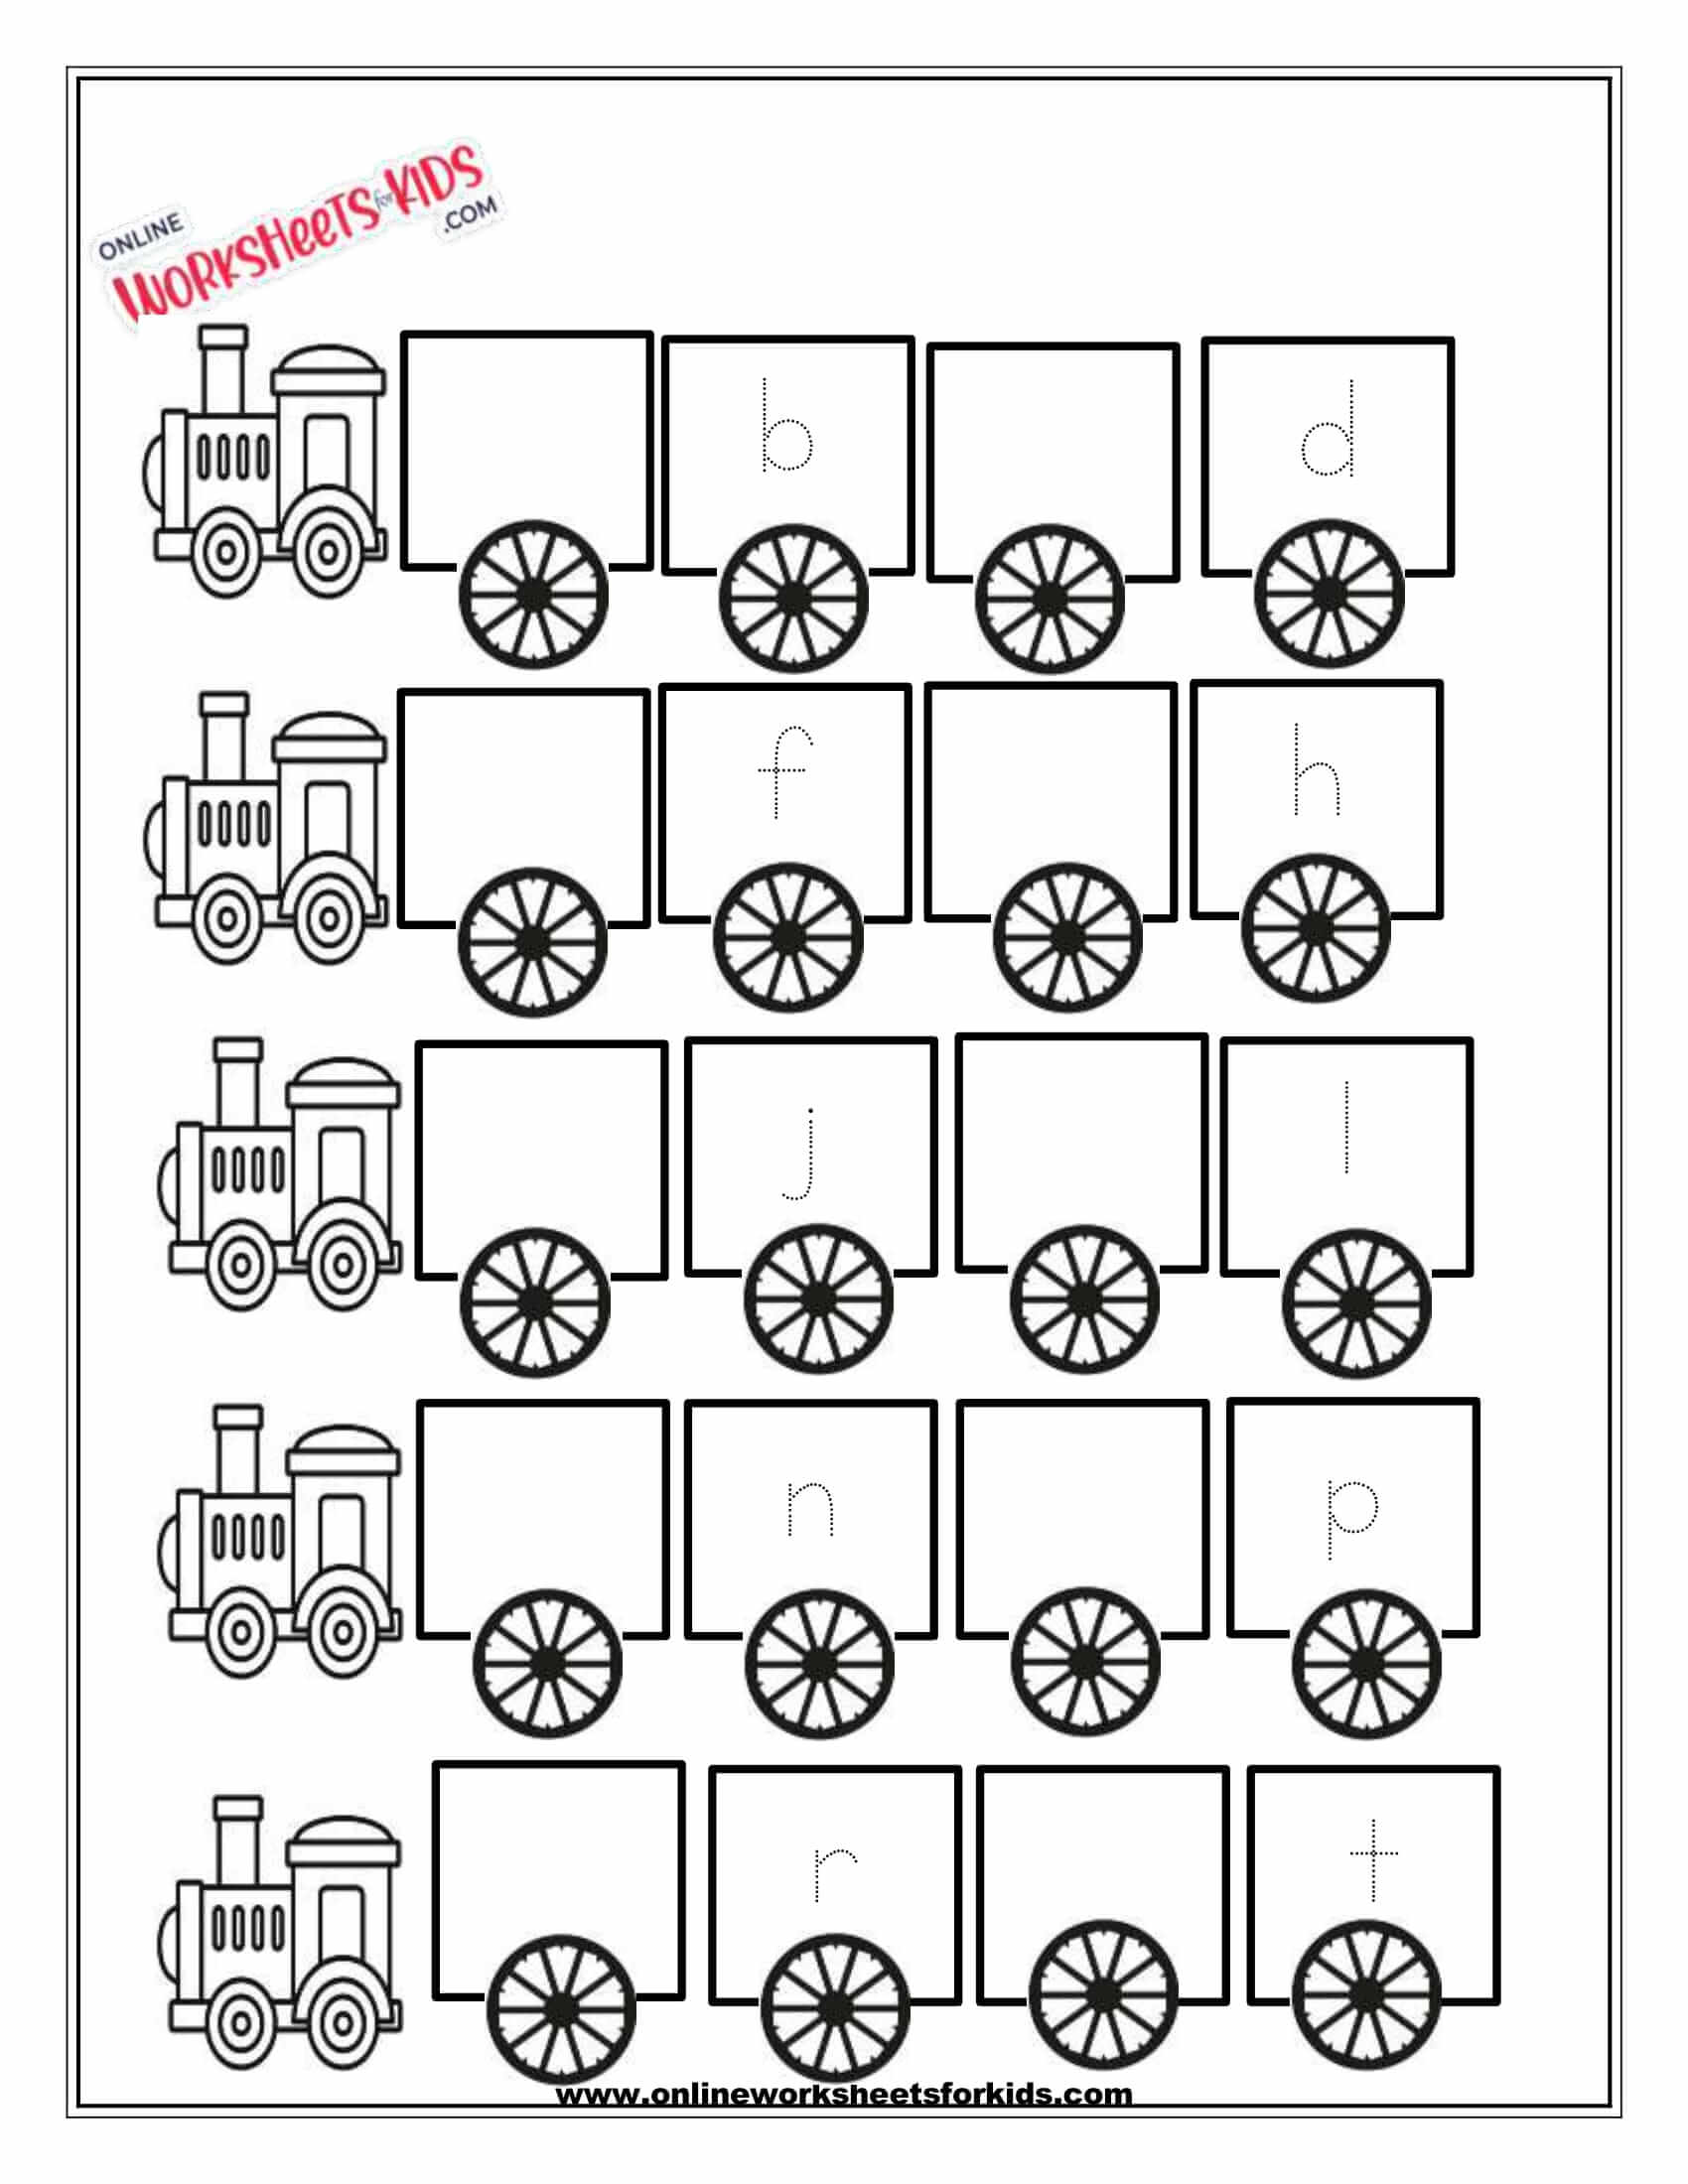 fill-in-the-missing-letter-a-z-worksheets-pack-printable-and-online